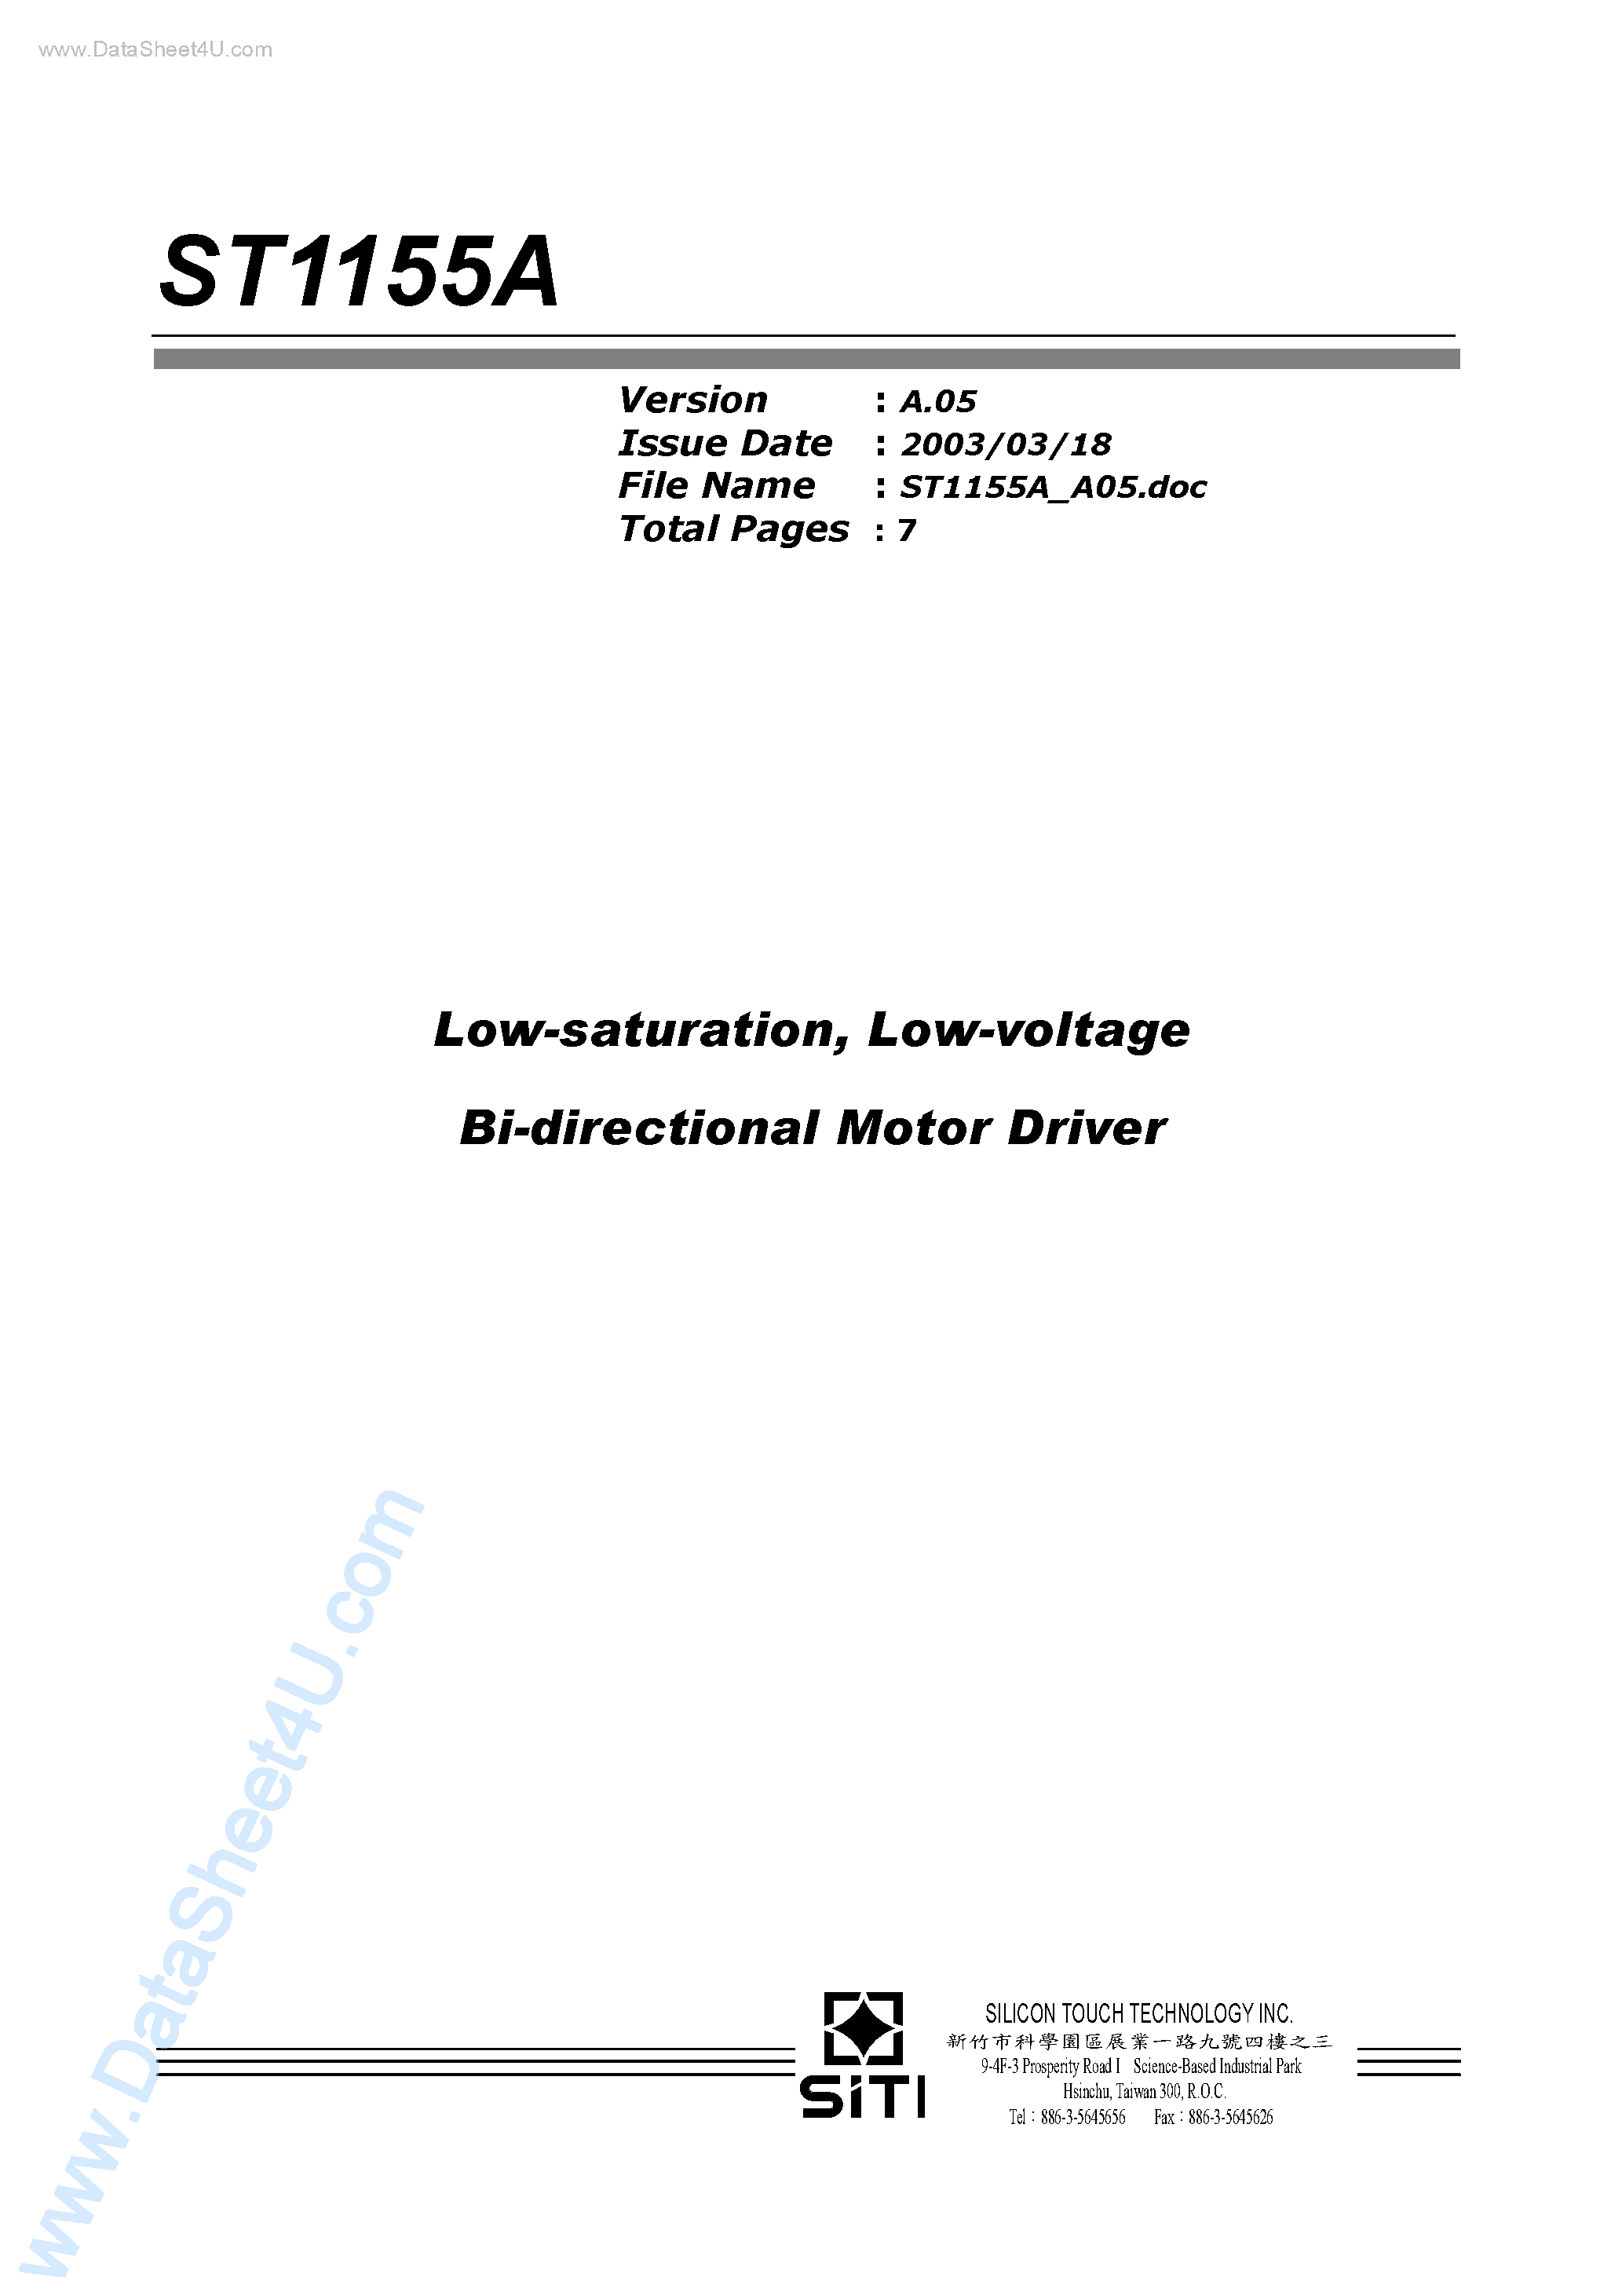 Datasheet ST1155A - Low-voltage bi-directional Motor Driver page 1